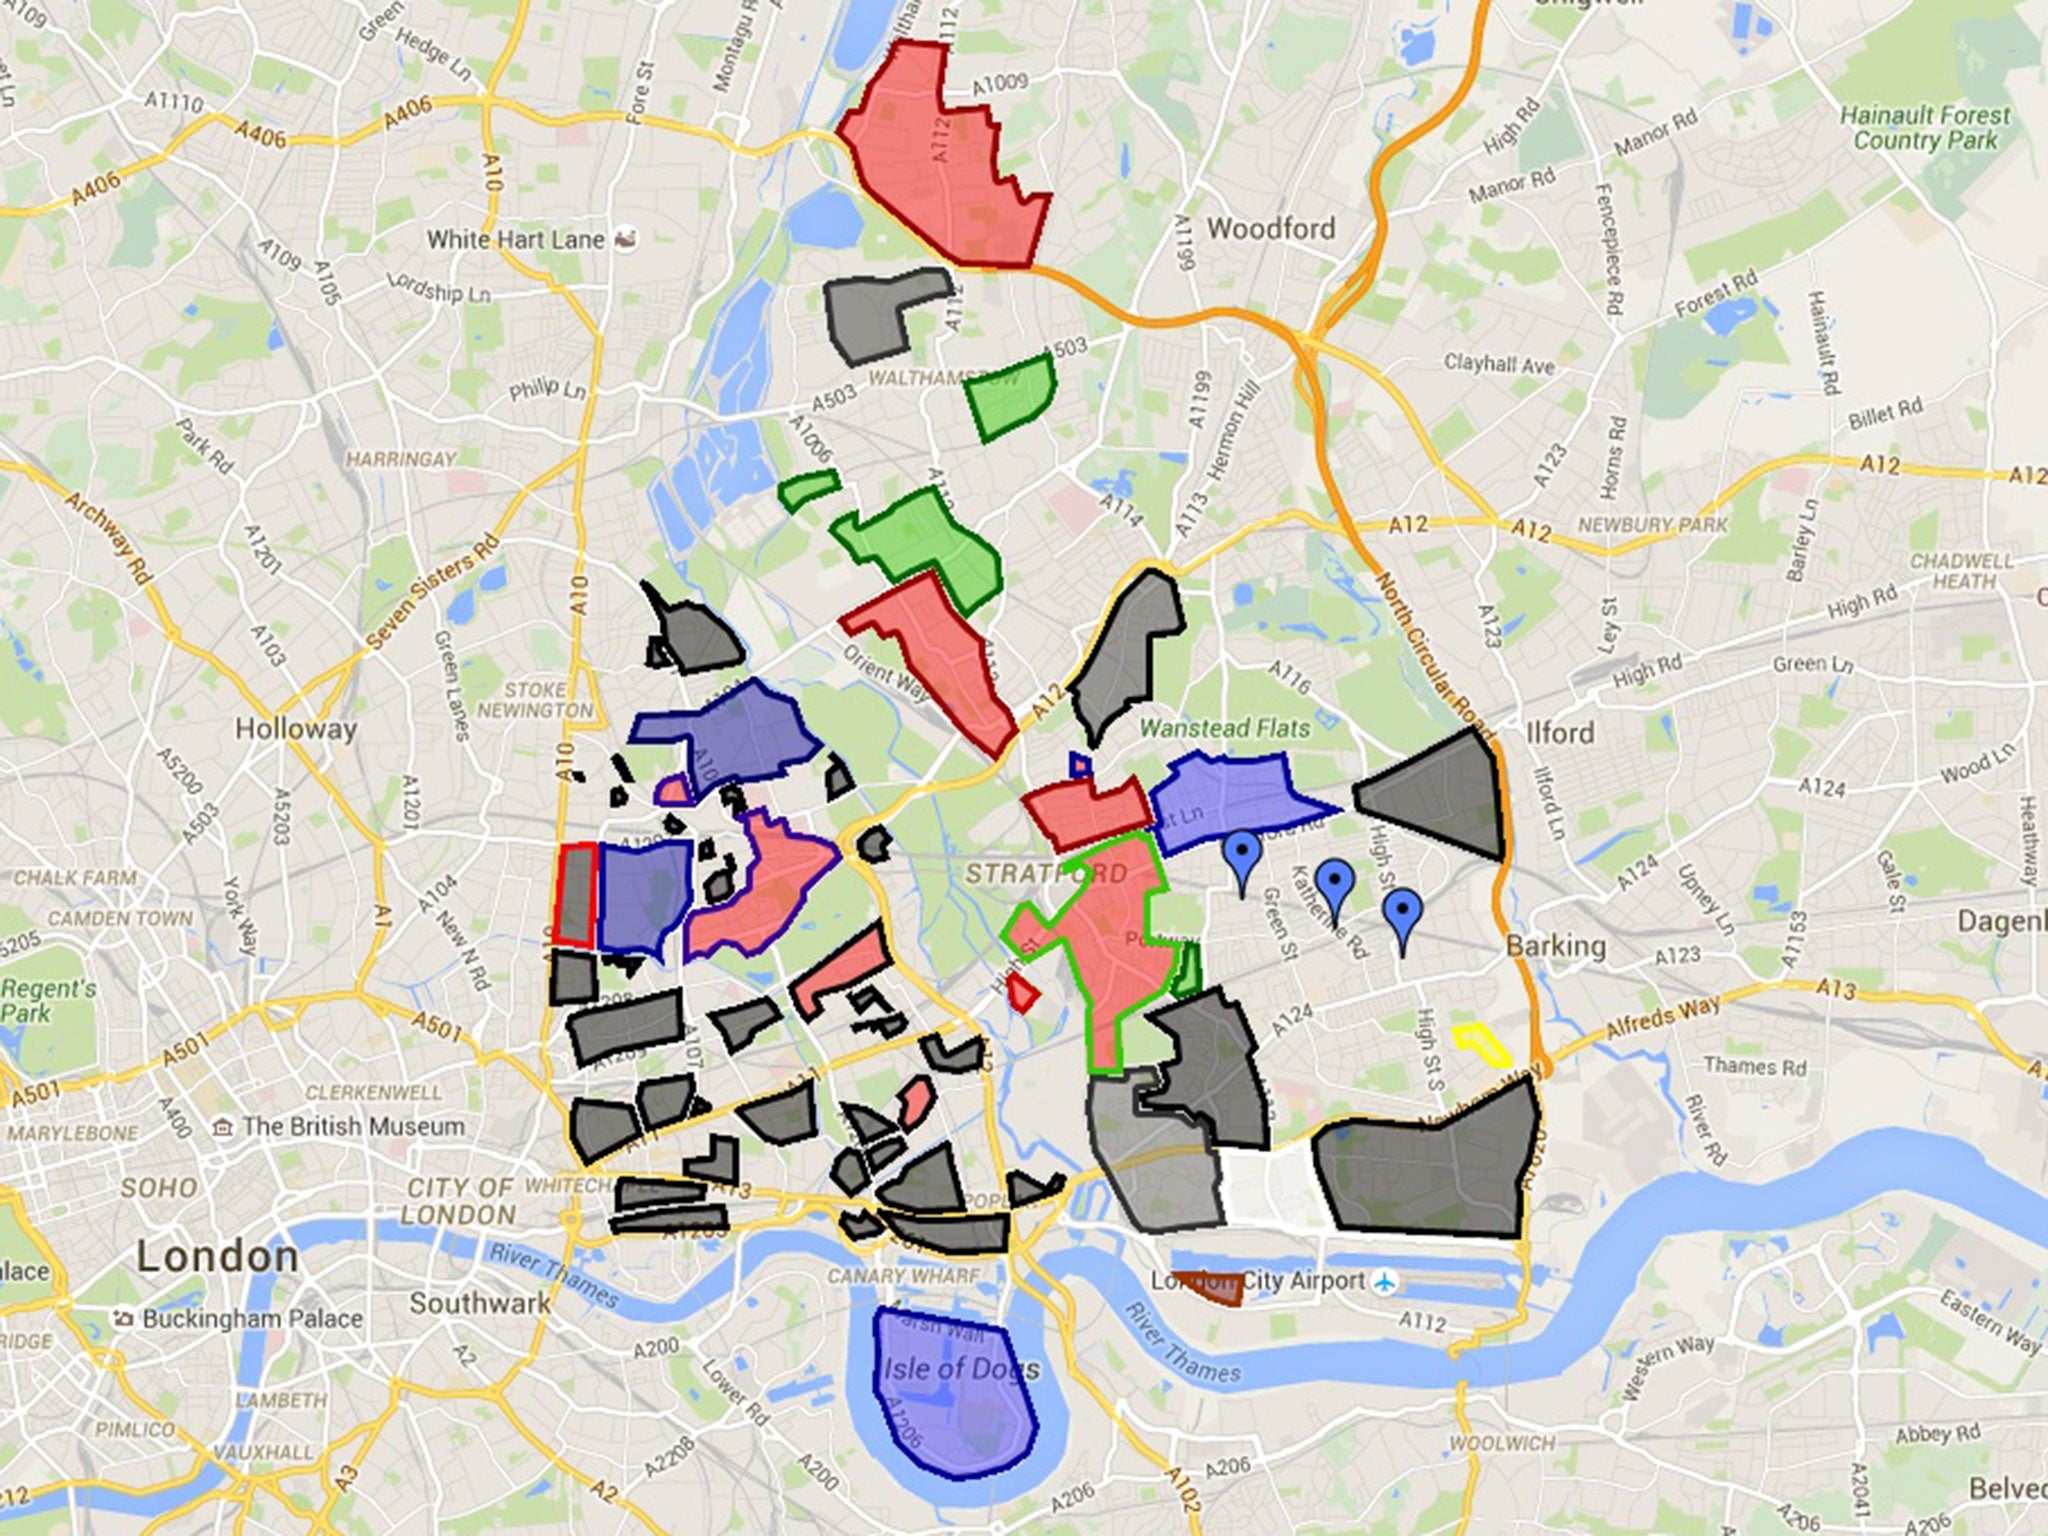 Territories "controlled" by east London gangs